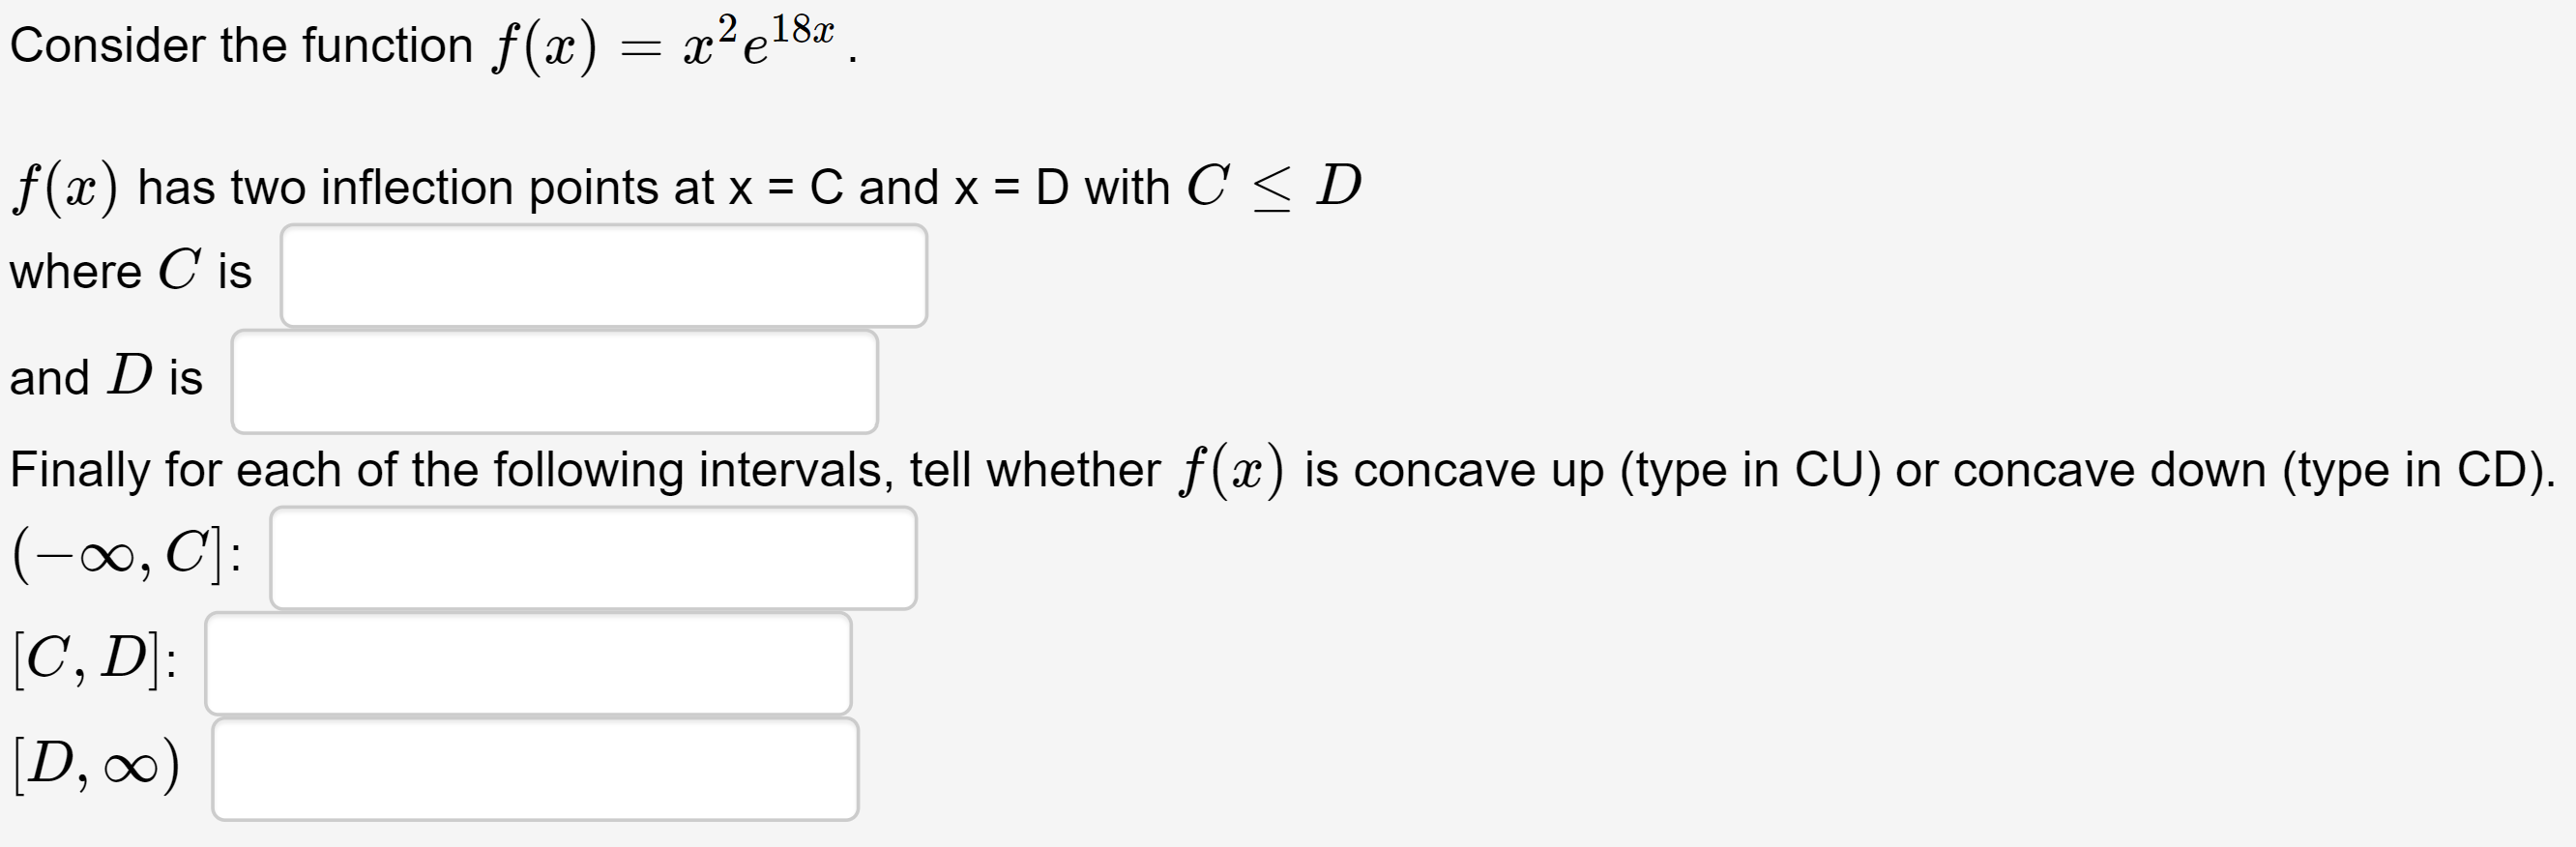 Consider the function f(x) = x²e18#.
f(x) has two inflection points at x = C and x = D with C <D
where C is
and D is
Finally for each of the following intervals, tell whether f(x) is concave up (type in CU) or concave down (type in CD).
(-∞, CJ:
[C, D]:
[D, 0)
